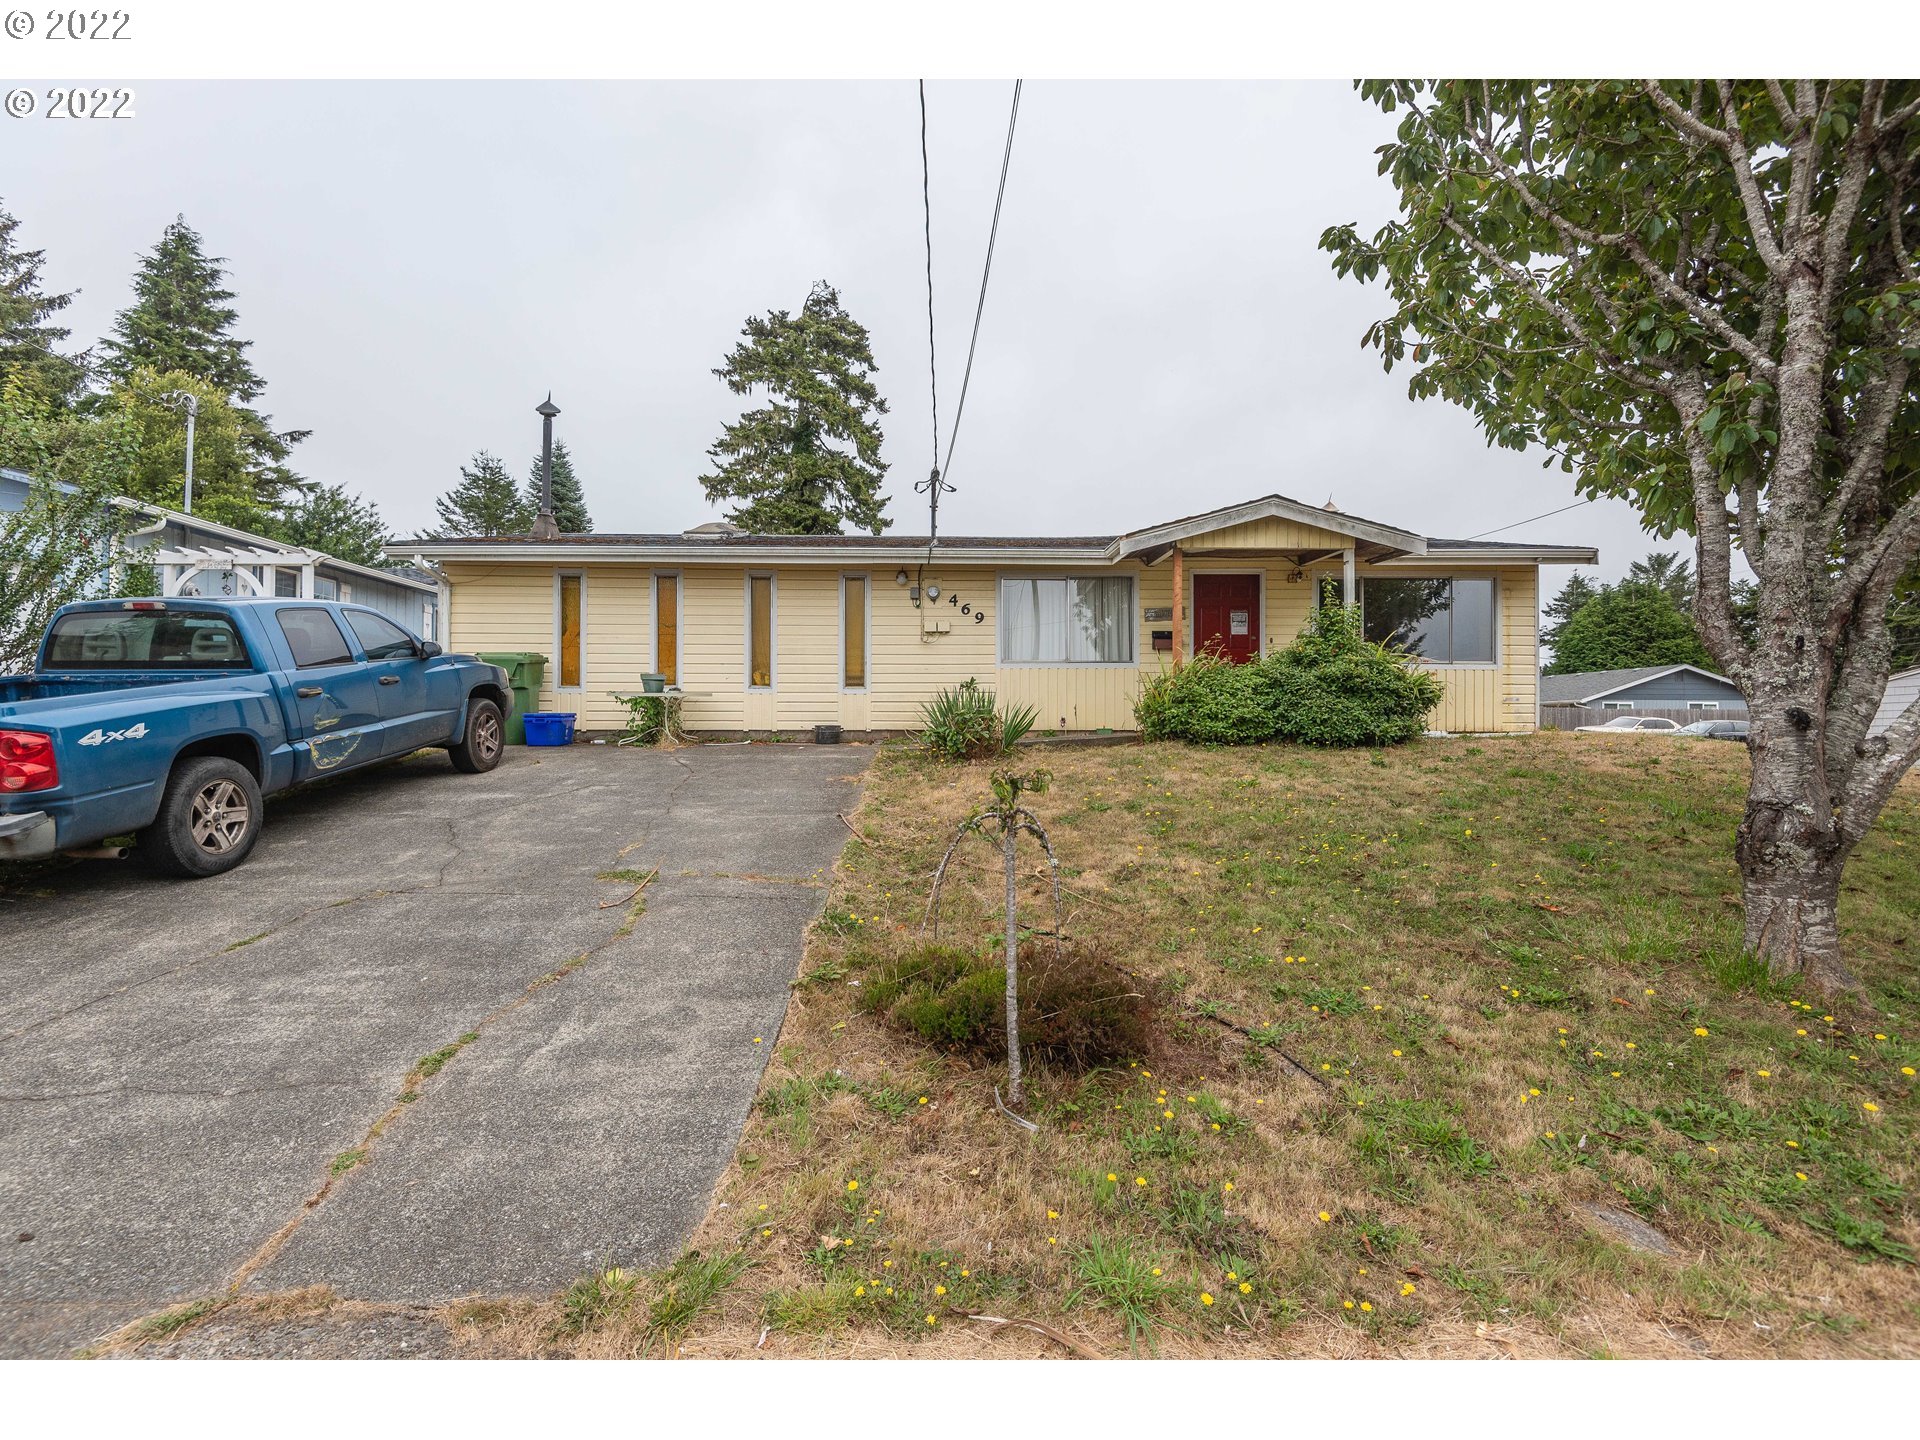 469 S WALL ST, Coos Bay, OR 97420